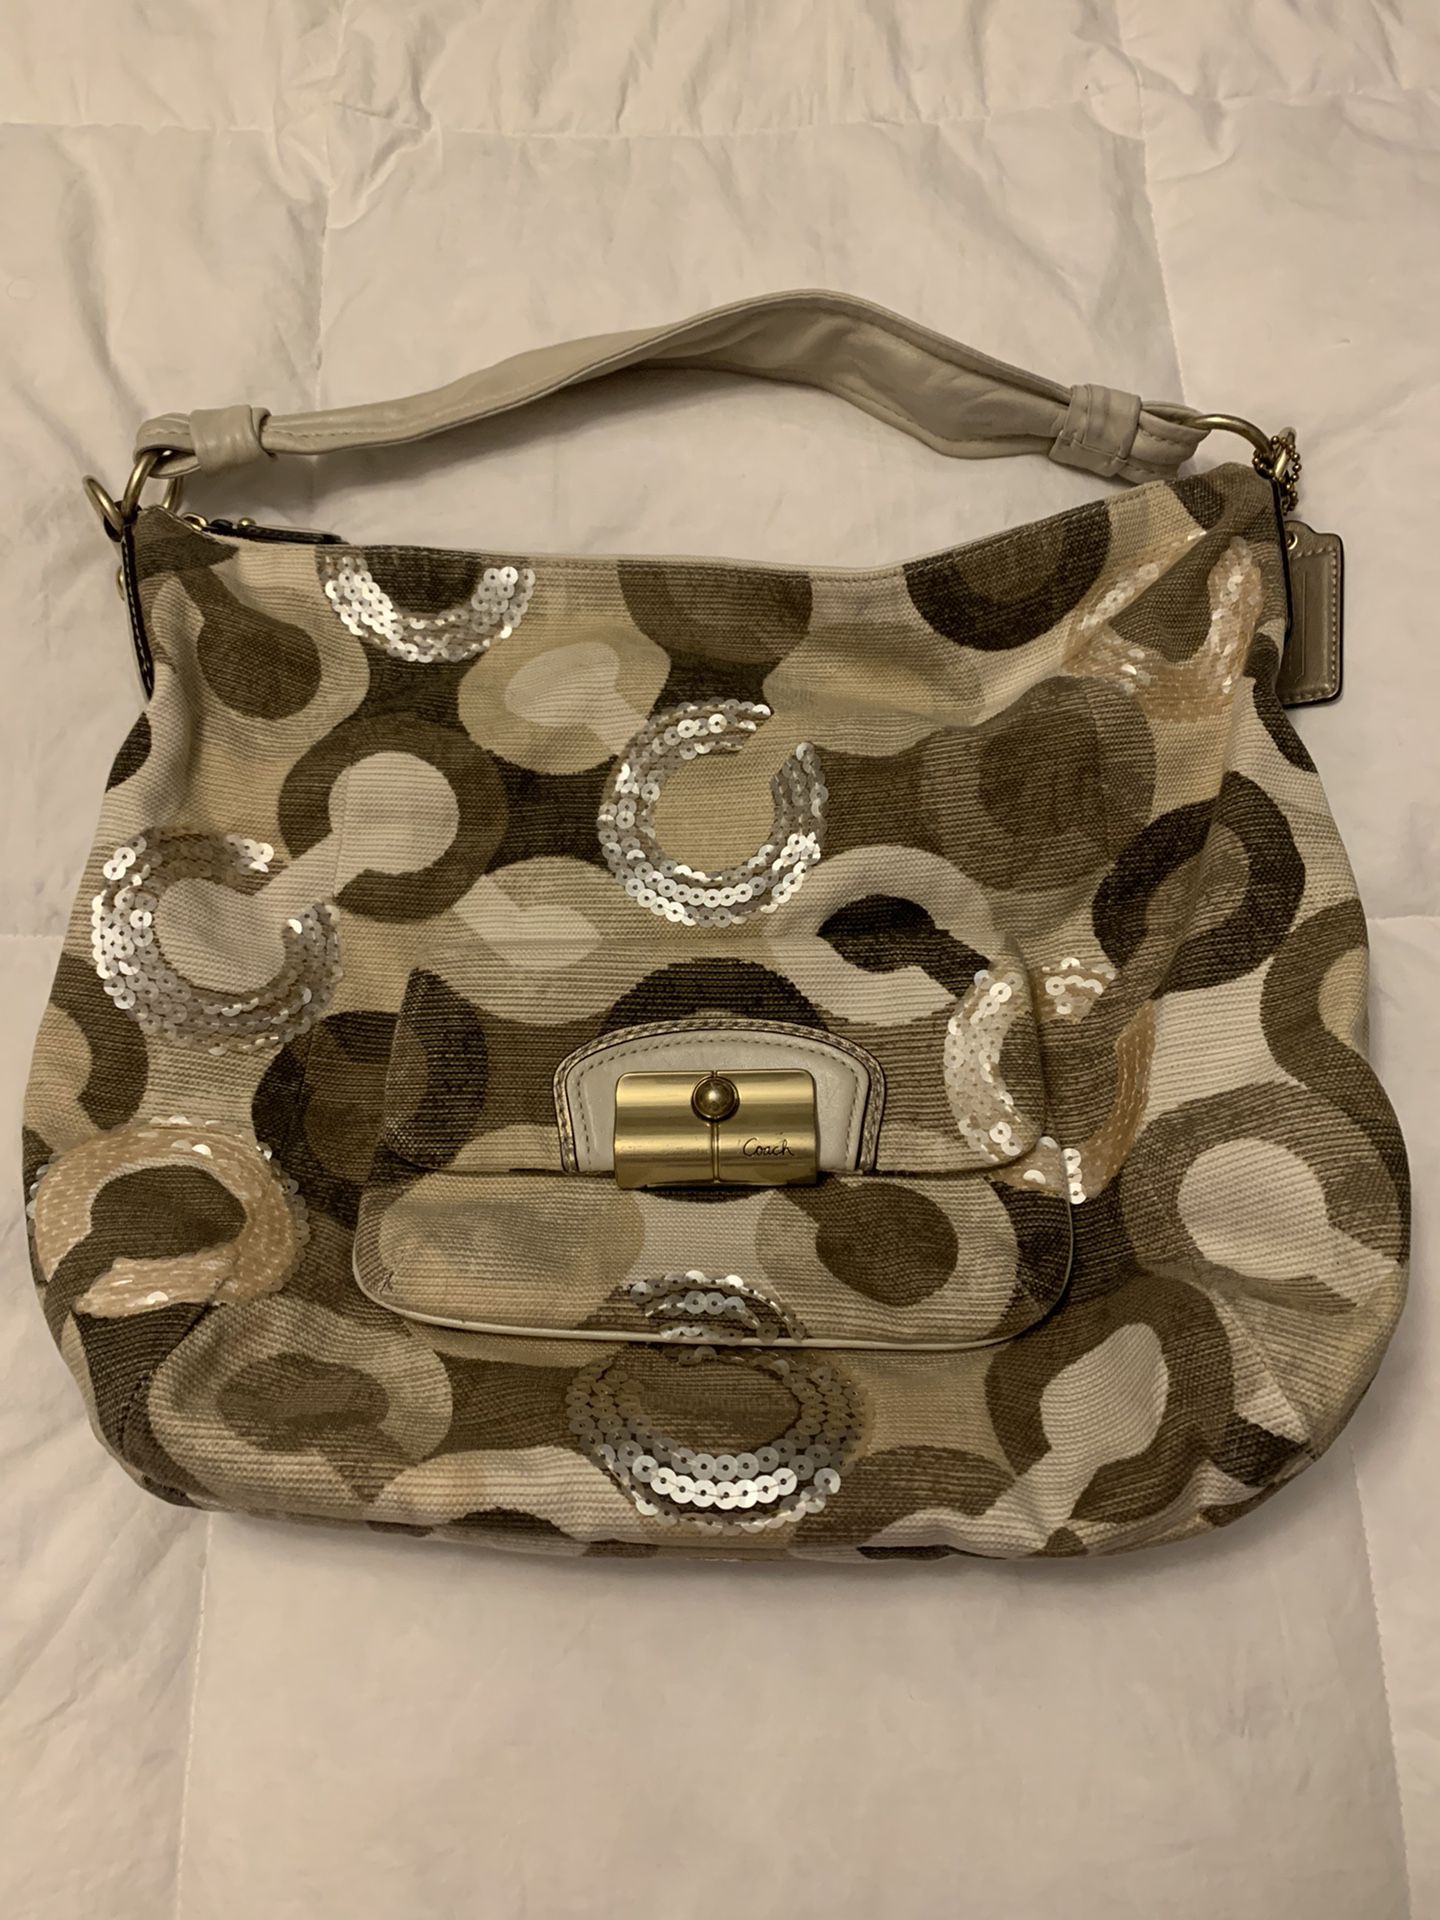 Chanel Vintage Purse Authentic for Sale in Miami, FL - OfferUp